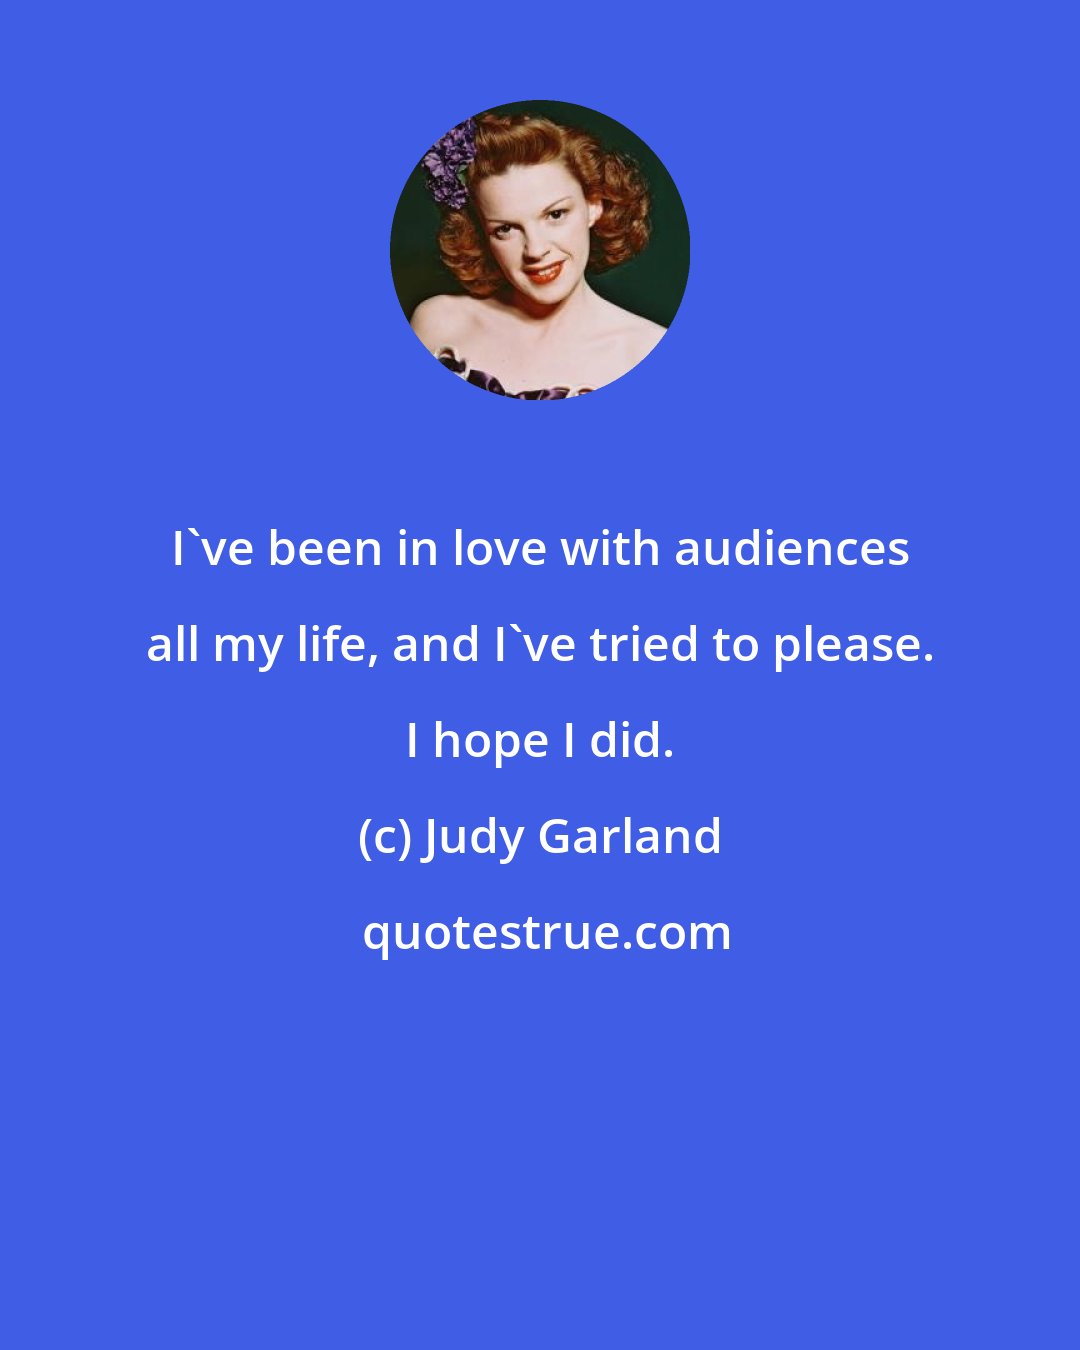 Judy Garland: I've been in love with audiences all my life, and I've tried to please. I hope I did.